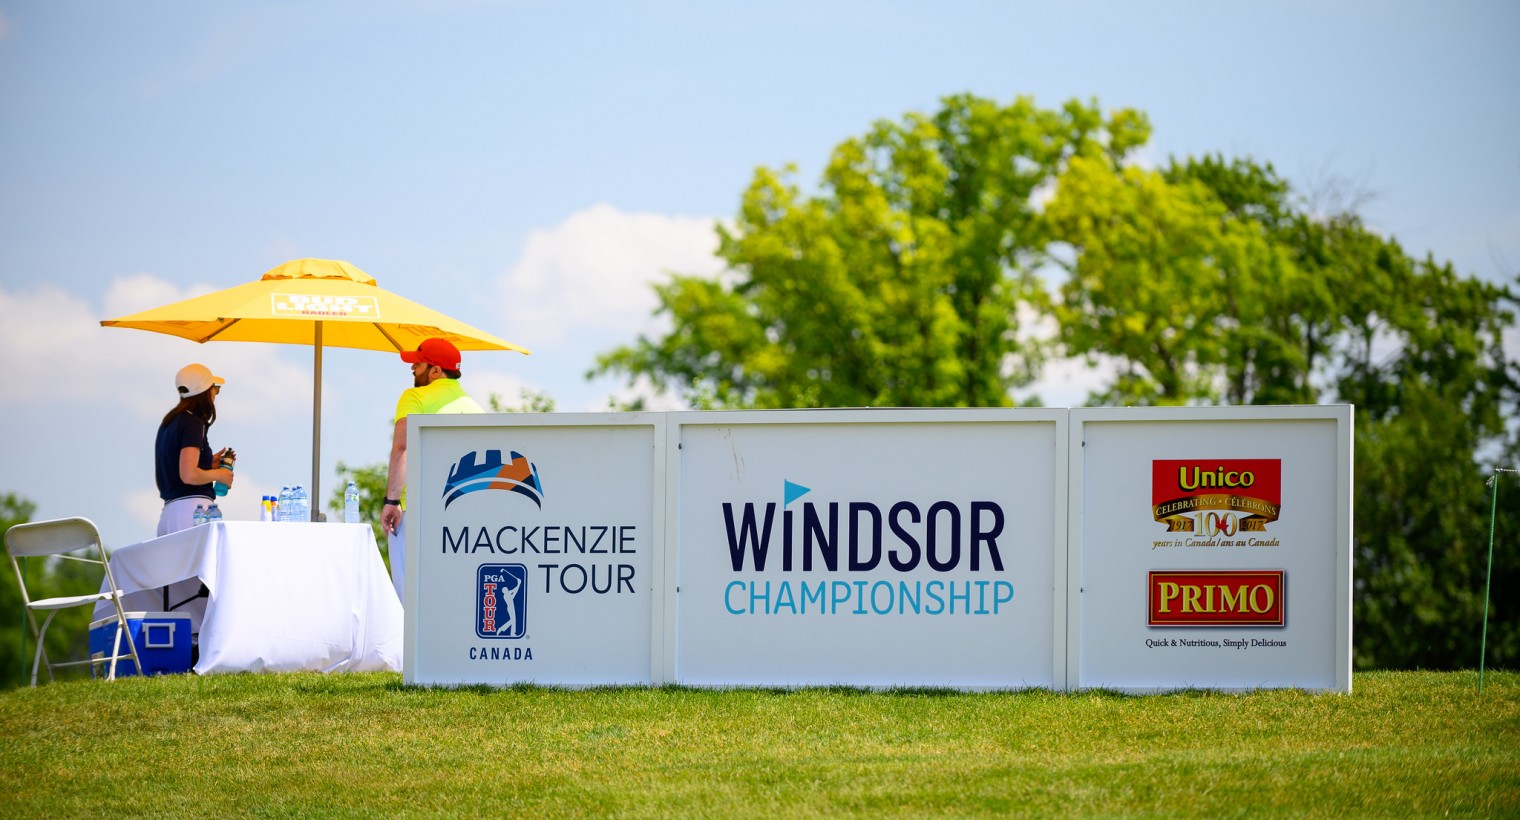 Windsor Championship golf tournament called off as tour cancels 2020 season